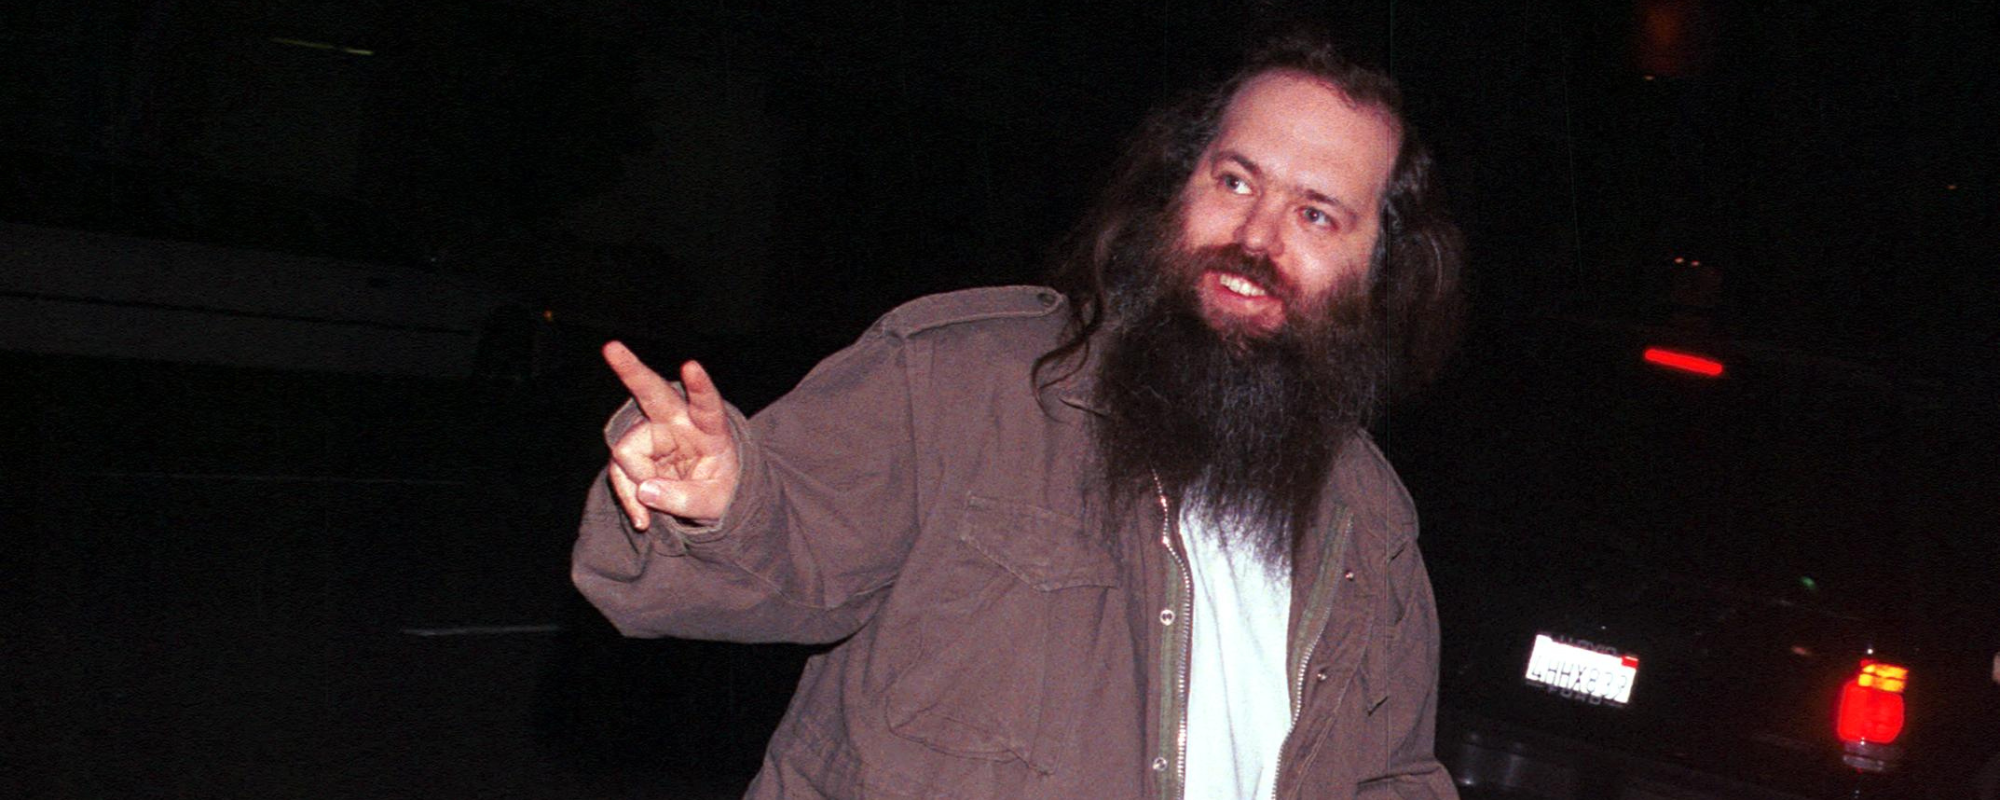 Rick Rubin: The Invisibility of Hip Hop's Greatest Producer 